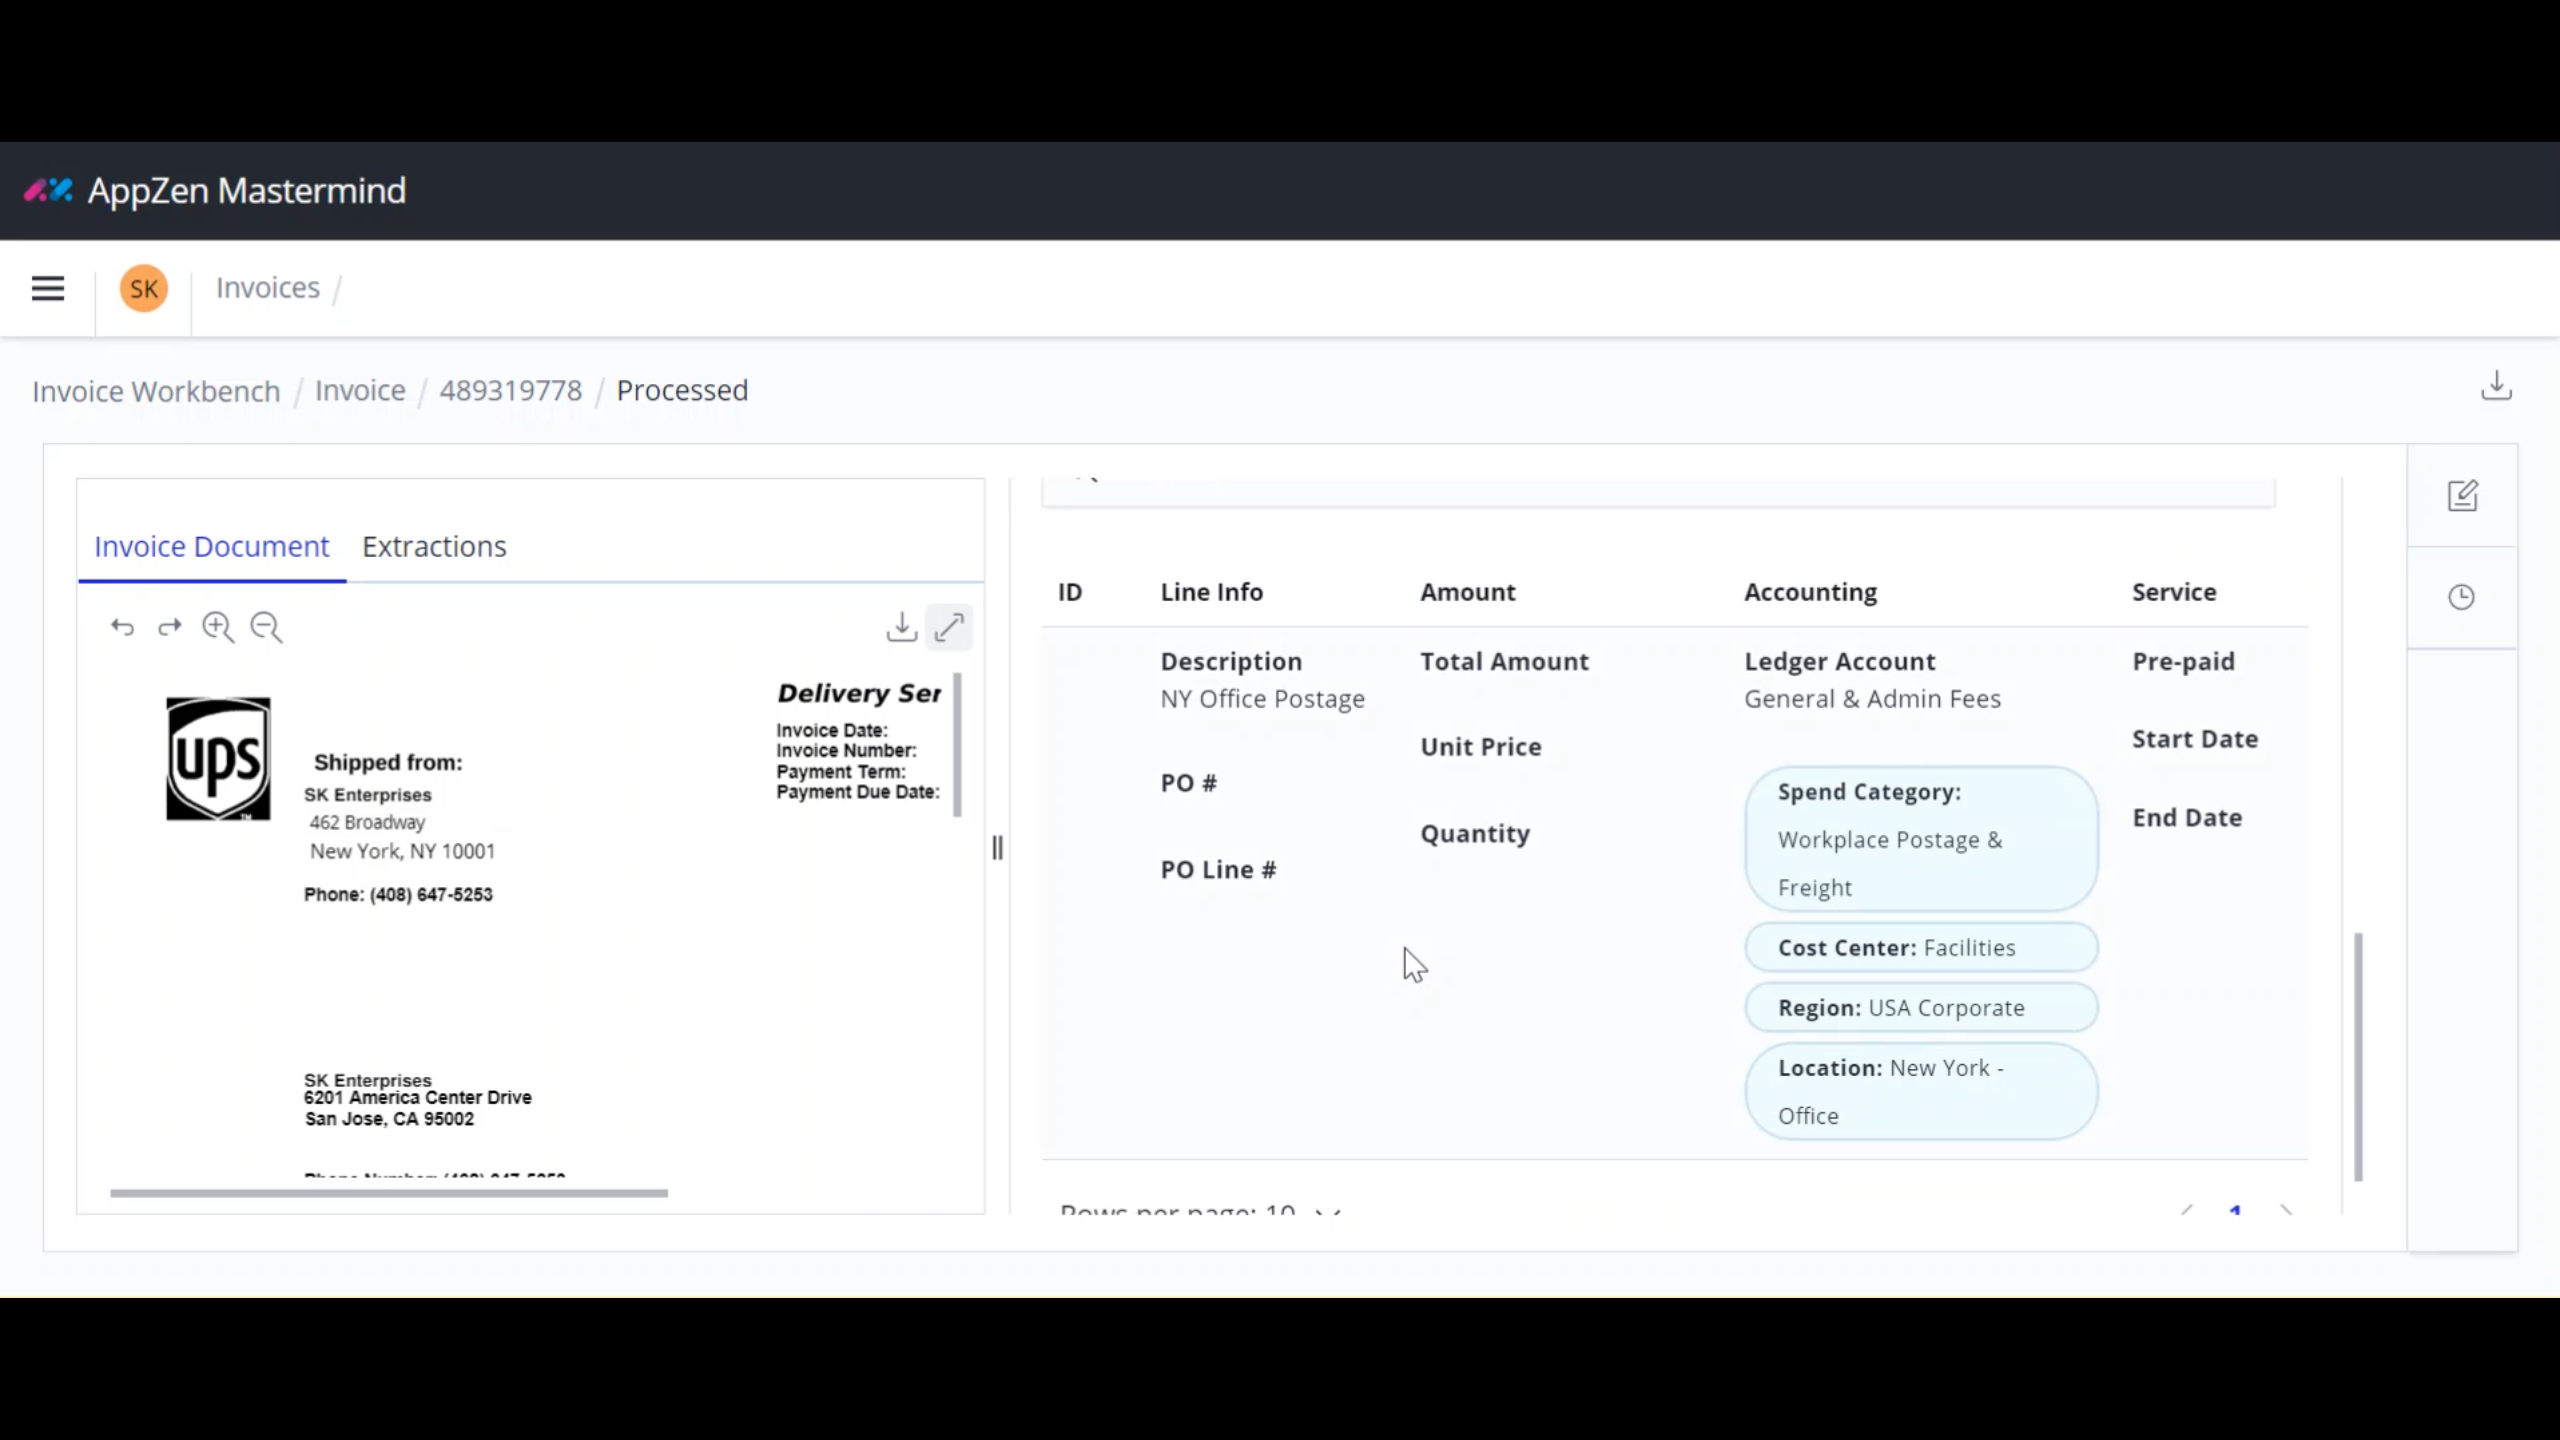 AppZen Autonomous AP - invoice view with spend category, cost center, region, and location predictions